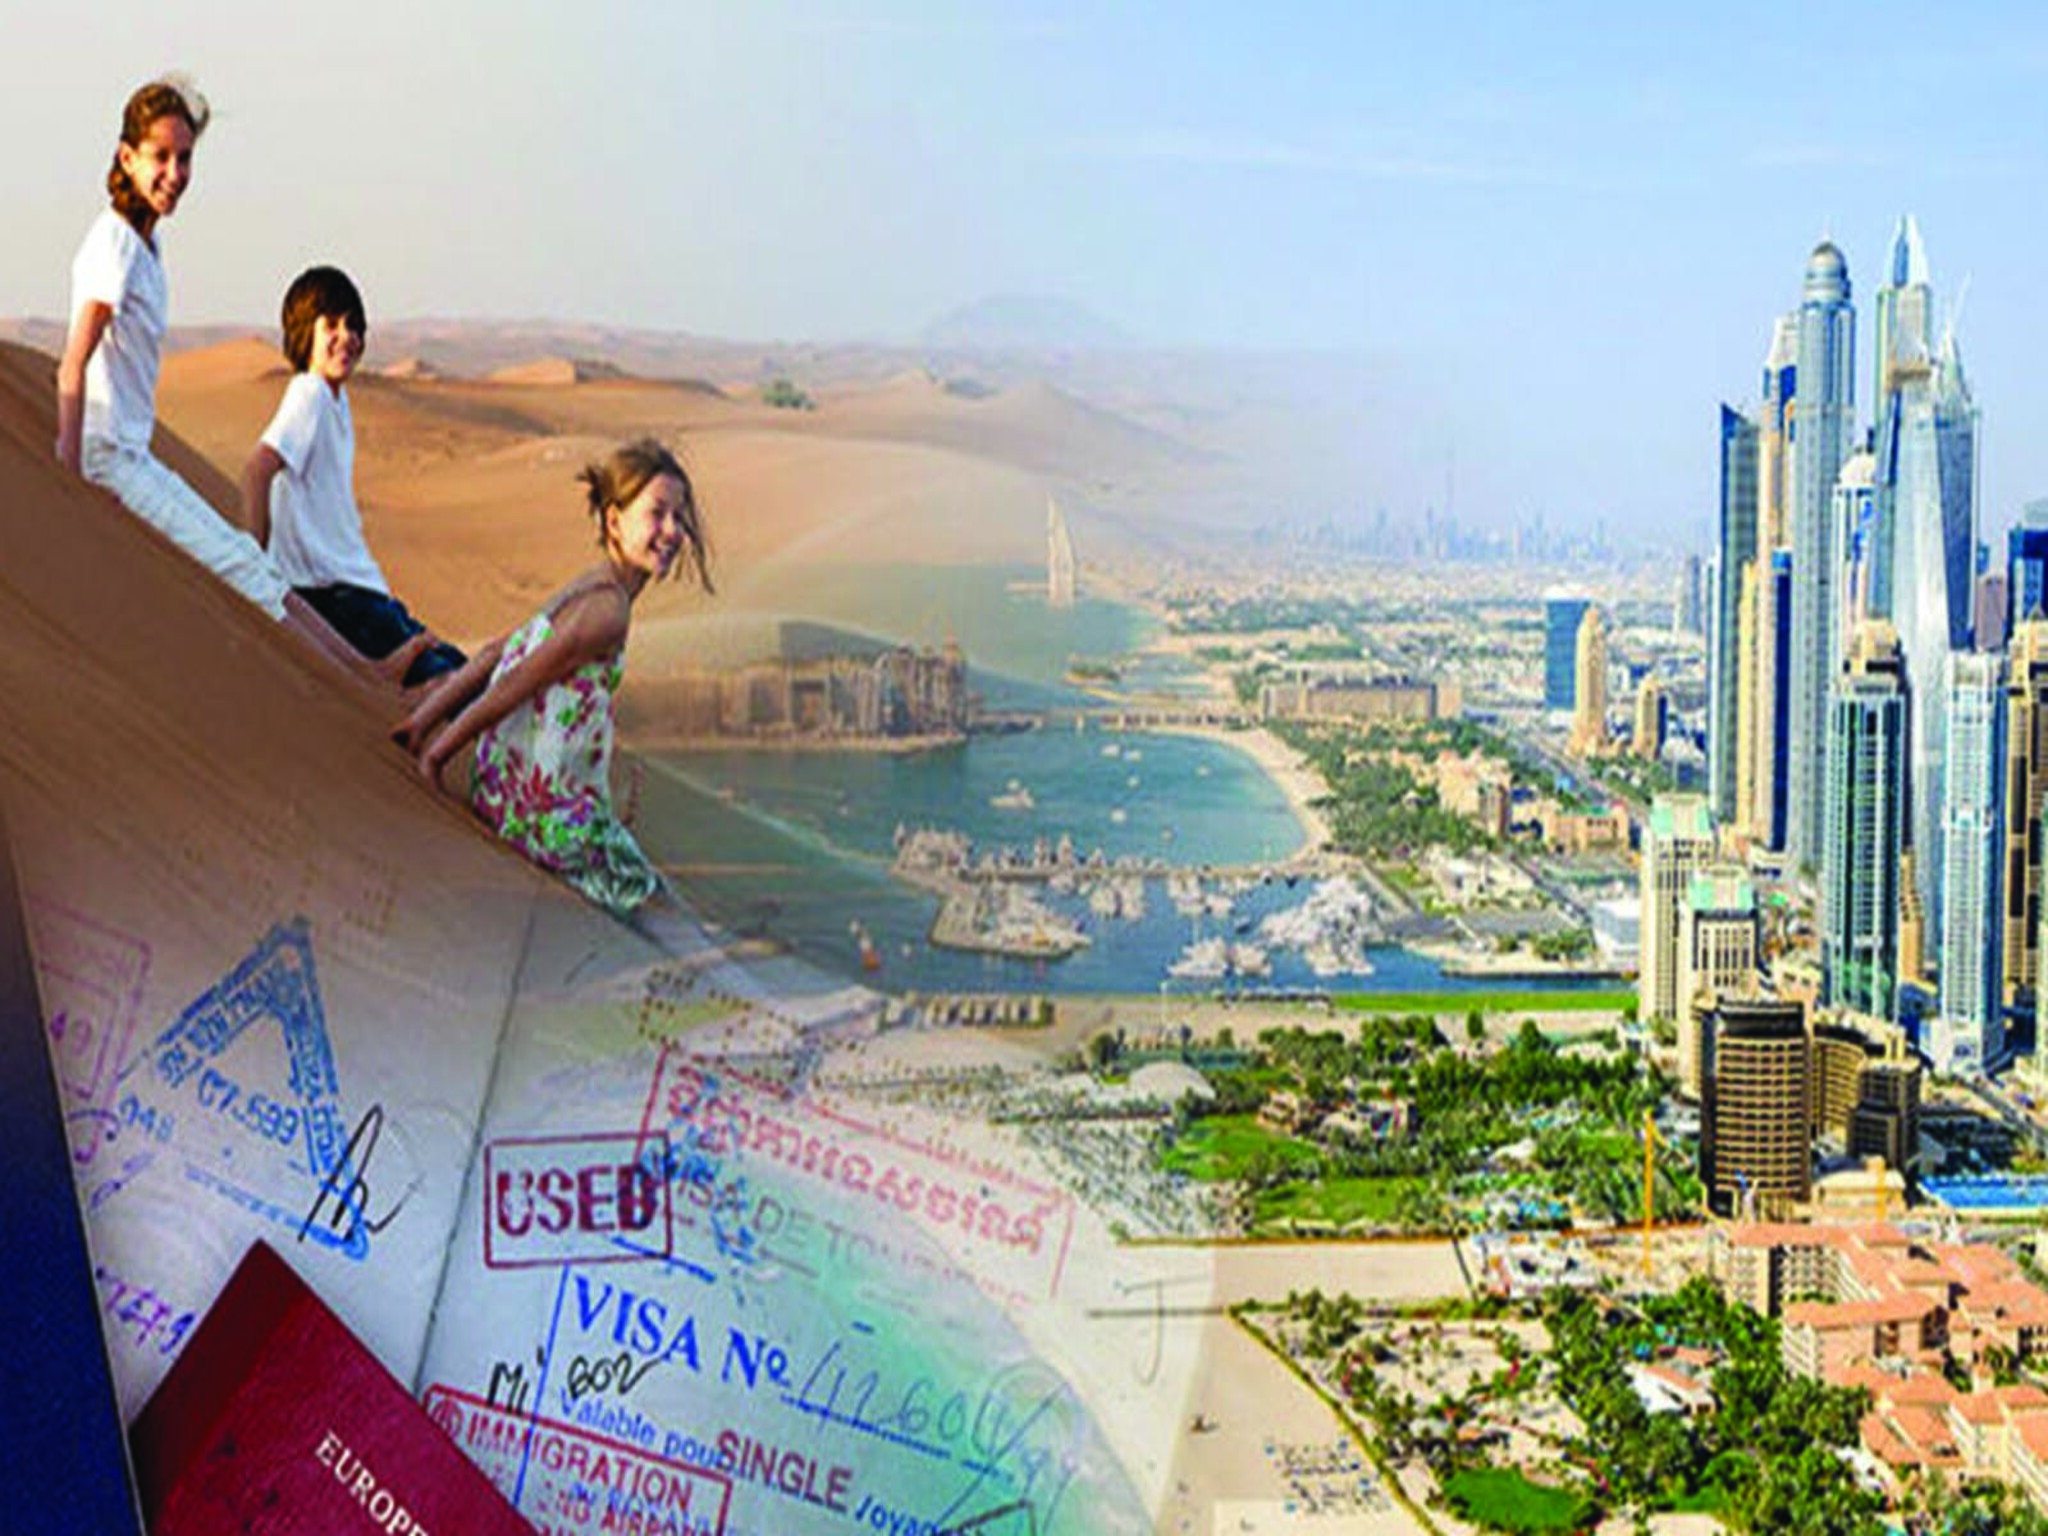 The UAE issues a multiple-entry tourist visa for 5 years